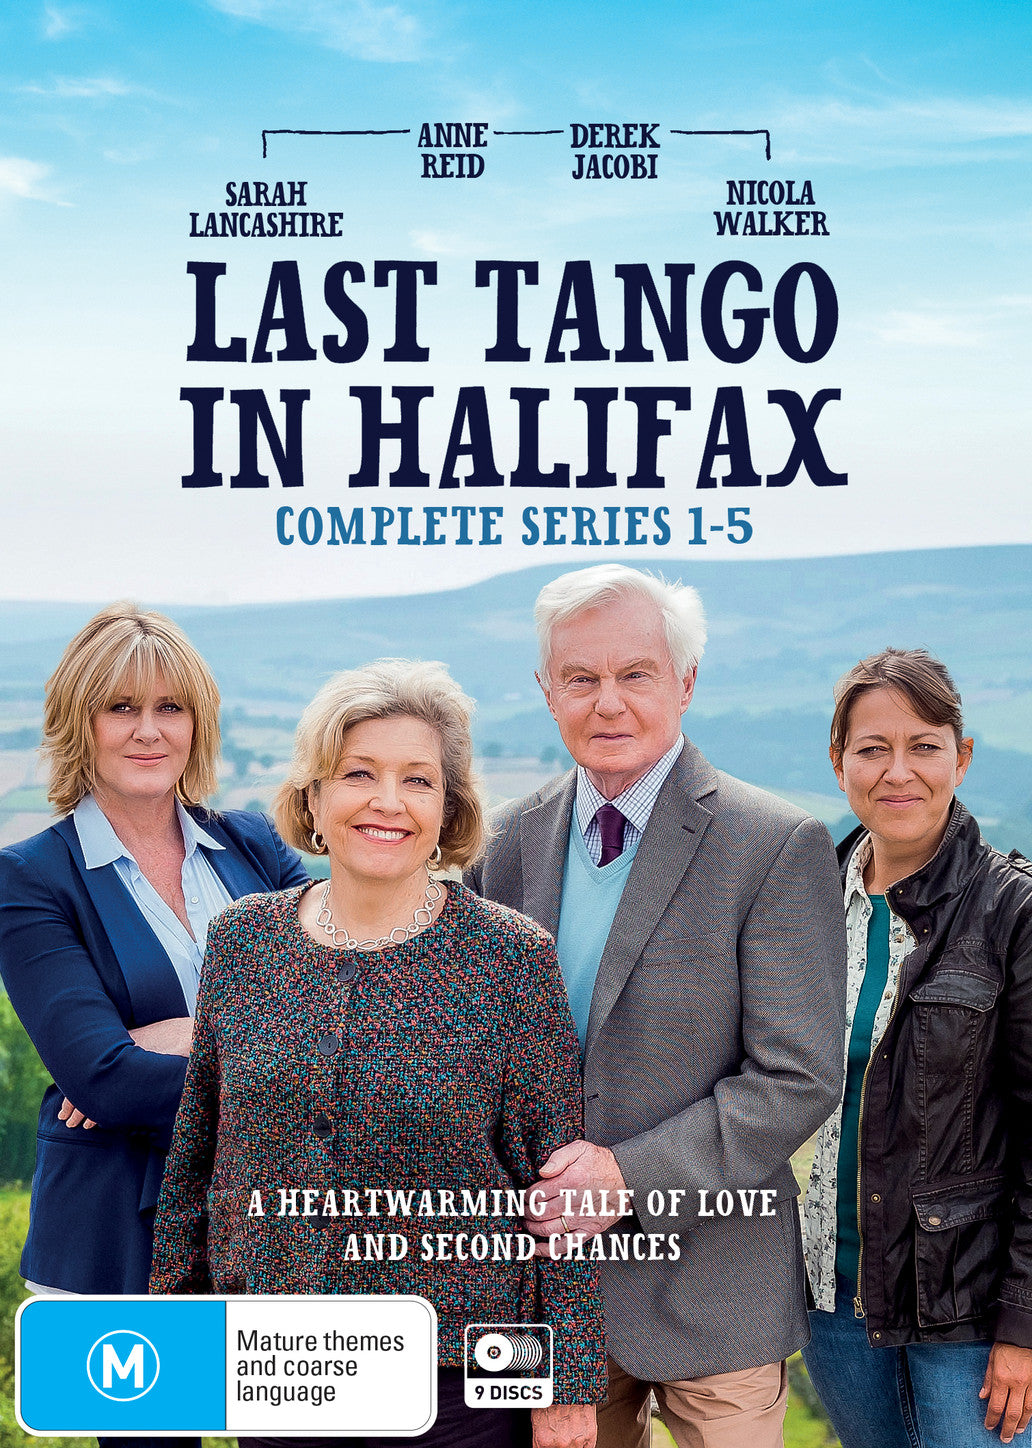 THE LAST TANGO IN HALIFAX COMPLETE SERIES 1 - 5